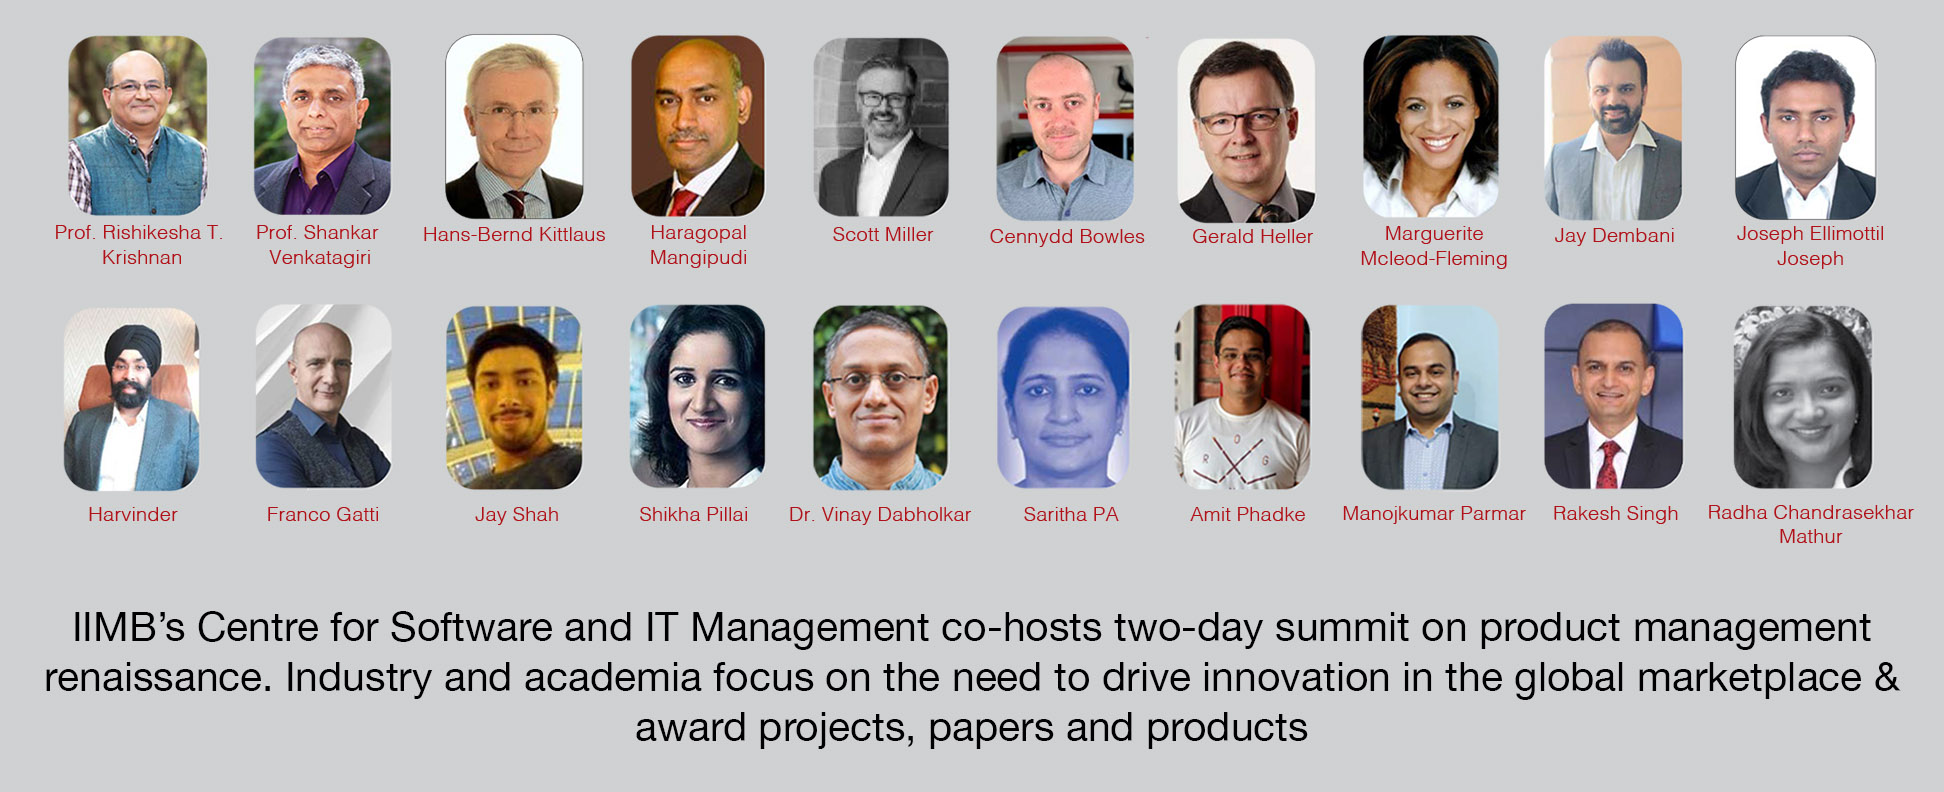 IIMB’s Centre for Software and IT Management co-hosts two-day summit on product management renaissance 